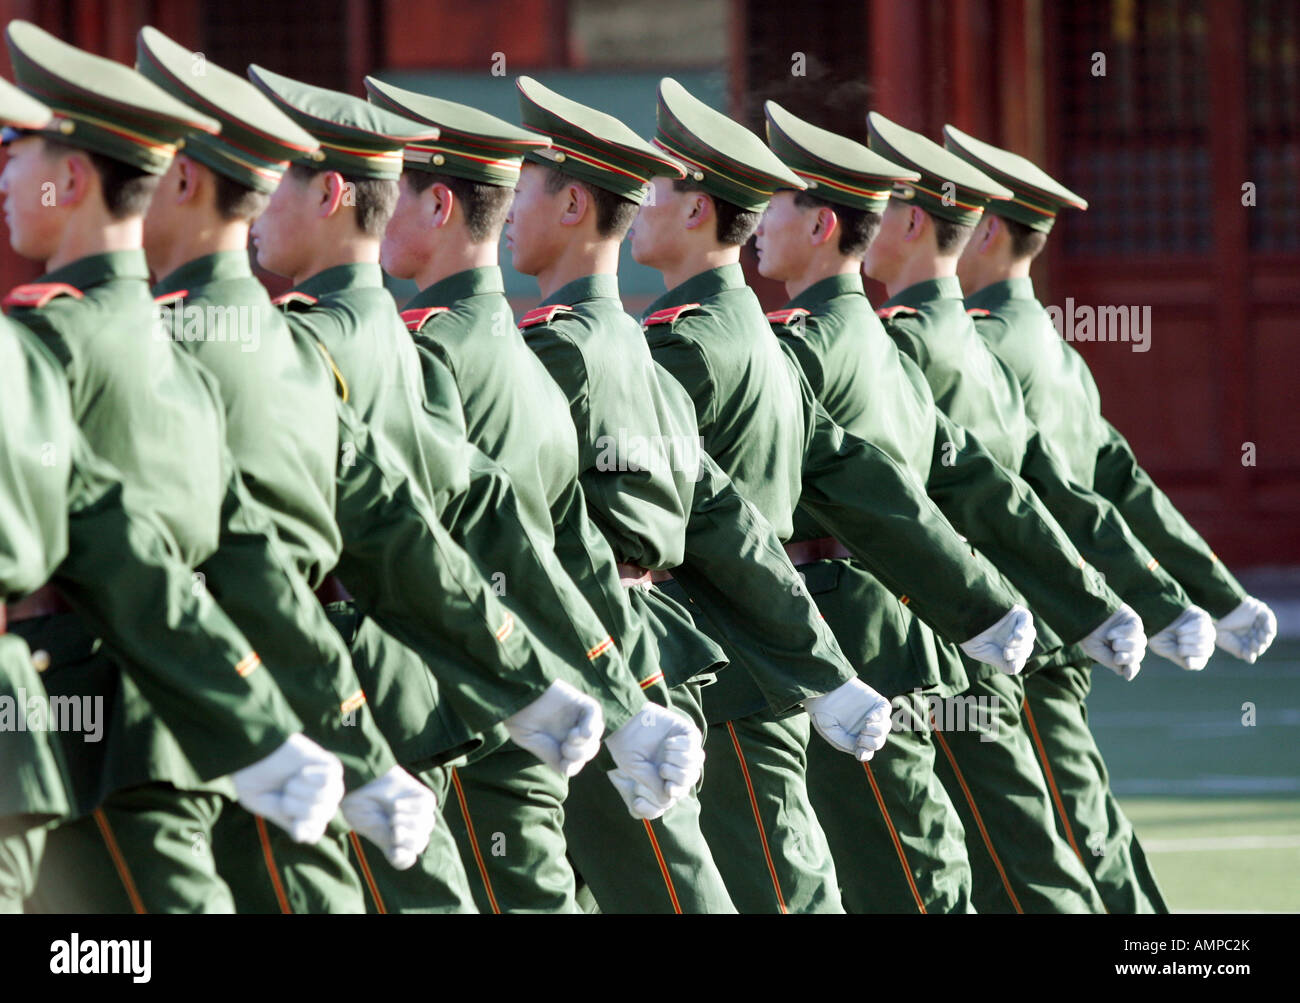 Chinese soldiers marching in front of the Imperial Palace, Beijing, China Stock Photo